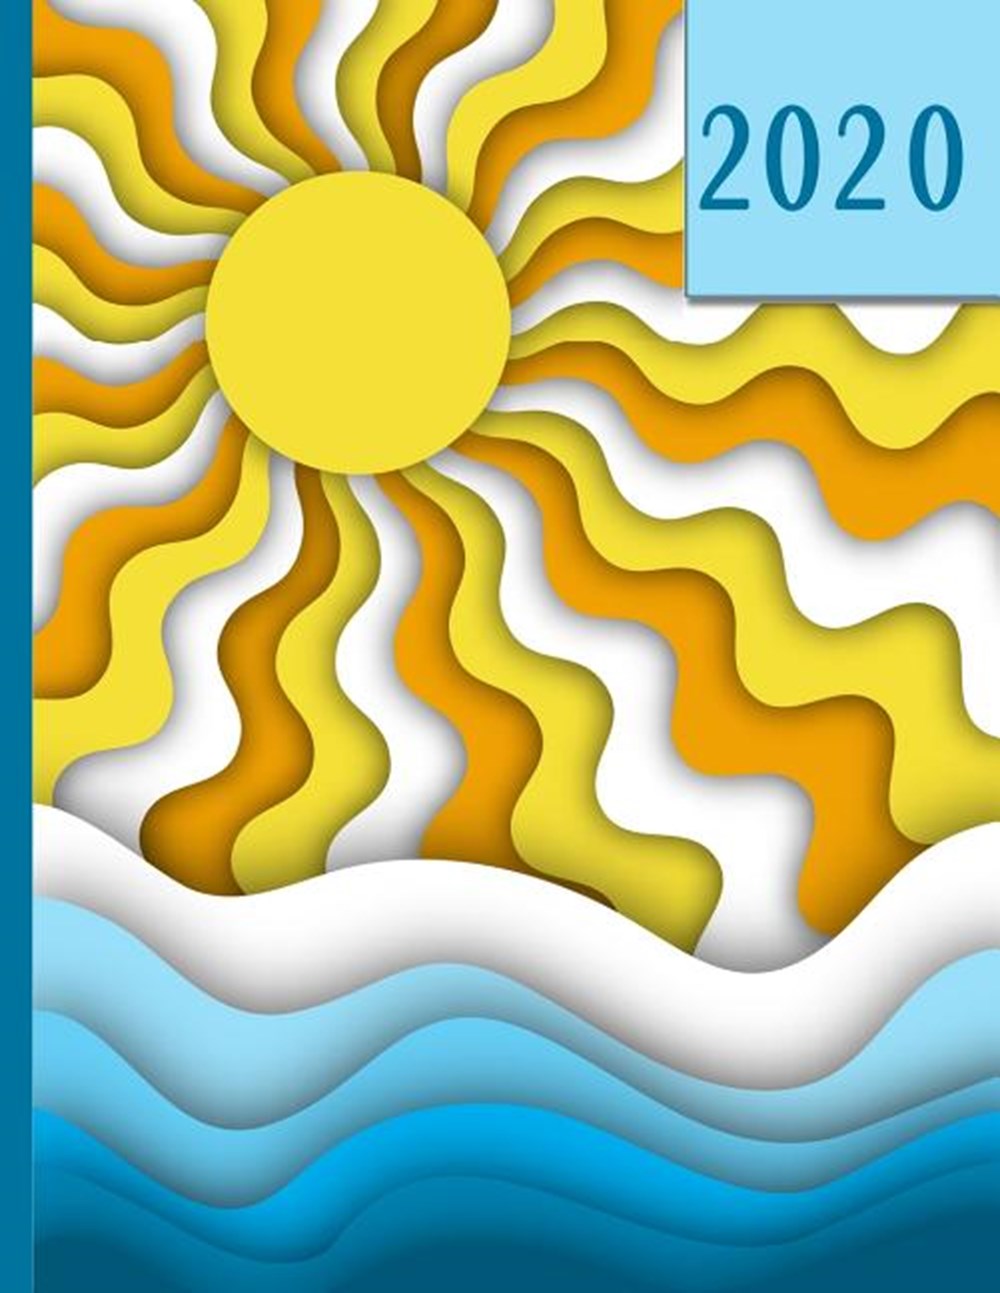 Fun in the Sun Paper Cutout - Boats on the Water 2020 Schedule Planner and Organizer / Weekly Calend